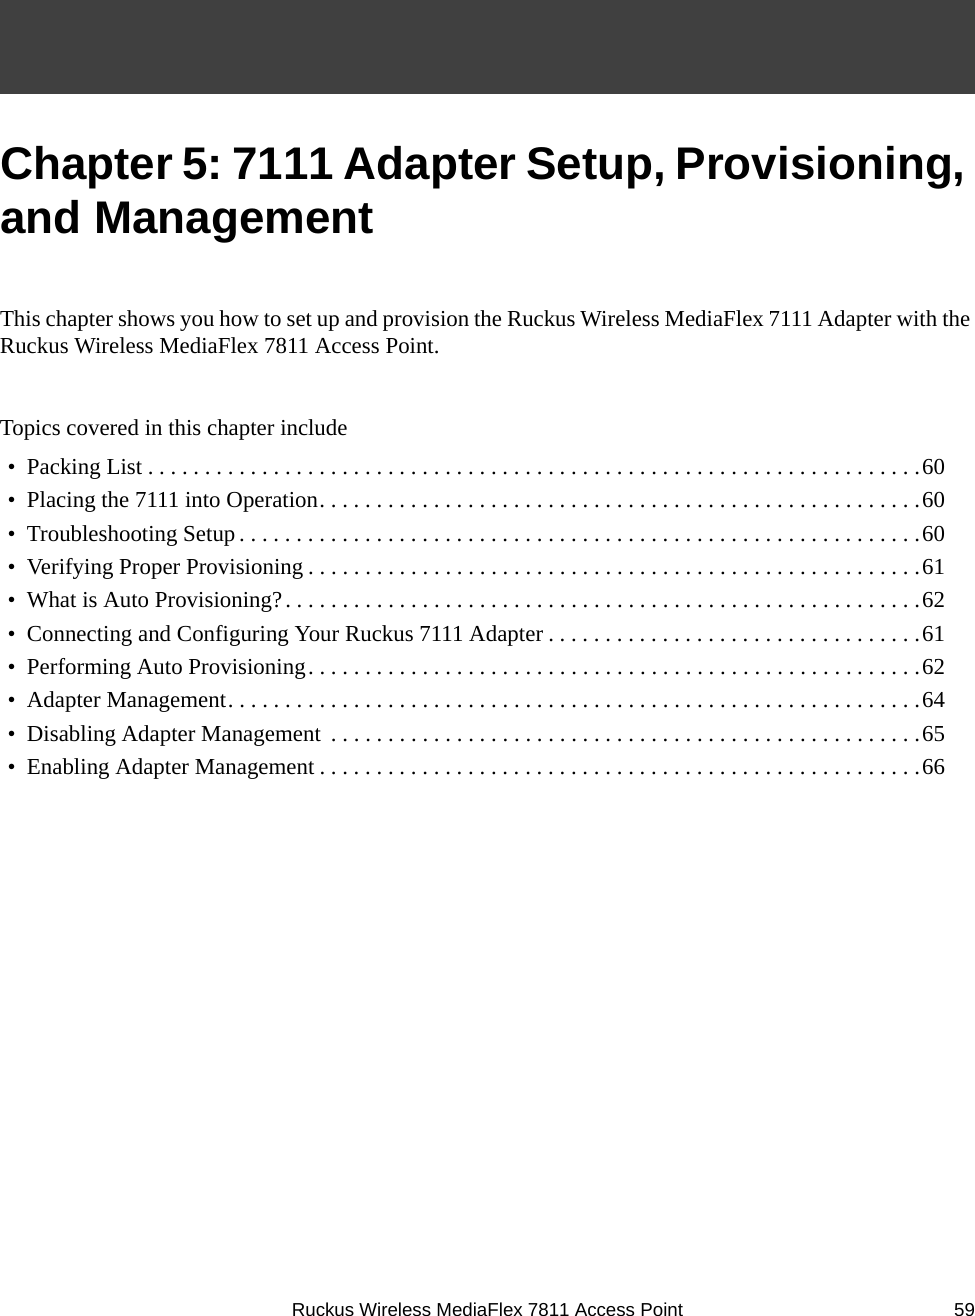 Ruckus Wireless MediaFlex 7811 Access Point 59Chapter 5: 7111 Adapter Setup, Provisioning, and ManagementThis chapter shows you how to set up and provision the Ruckus Wireless MediaFlex 7111 Adapter with the Ruckus Wireless MediaFlex 7811 Access Point.Topics covered in this chapter include•  Packing List . . . . . . . . . . . . . . . . . . . . . . . . . . . . . . . . . . . . . . . . . . . . . . . . . . . . . . . . . . . . . . . . . . . .60•  Placing the 7111 into Operation. . . . . . . . . . . . . . . . . . . . . . . . . . . . . . . . . . . . . . . . . . . . . . . . . . . . .60•  Troubleshooting Setup. . . . . . . . . . . . . . . . . . . . . . . . . . . . . . . . . . . . . . . . . . . . . . . . . . . . . . . . . . . .60•  Verifying Proper Provisioning . . . . . . . . . . . . . . . . . . . . . . . . . . . . . . . . . . . . . . . . . . . . . . . . . . . . . .61•  What is Auto Provisioning?. . . . . . . . . . . . . . . . . . . . . . . . . . . . . . . . . . . . . . . . . . . . . . . . . . . . . . . .62•  Connecting and Configuring Your Ruckus 7111 Adapter . . . . . . . . . . . . . . . . . . . . . . . . . . . . . . . . .61•  Performing Auto Provisioning. . . . . . . . . . . . . . . . . . . . . . . . . . . . . . . . . . . . . . . . . . . . . . . . . . . . . .62•  Adapter Management. . . . . . . . . . . . . . . . . . . . . . . . . . . . . . . . . . . . . . . . . . . . . . . . . . . . . . . . . . . . .64•  Disabling Adapter Management  . . . . . . . . . . . . . . . . . . . . . . . . . . . . . . . . . . . . . . . . . . . . . . . . . . . .65•  Enabling Adapter Management . . . . . . . . . . . . . . . . . . . . . . . . . . . . . . . . . . . . . . . . . . . . . . . . . . . . .66